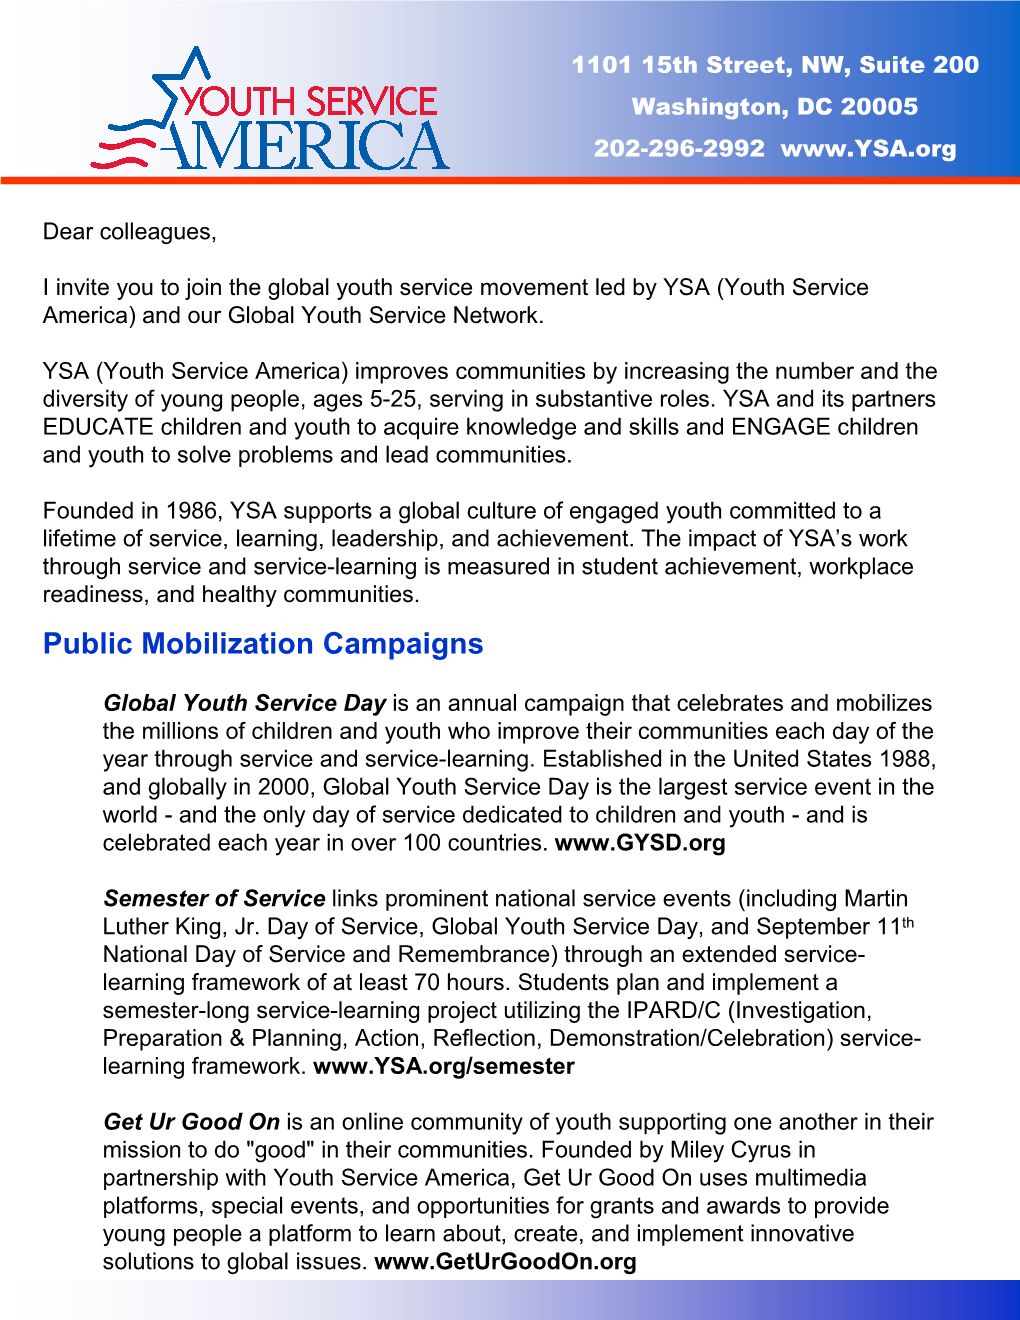 YSA Letter Overview